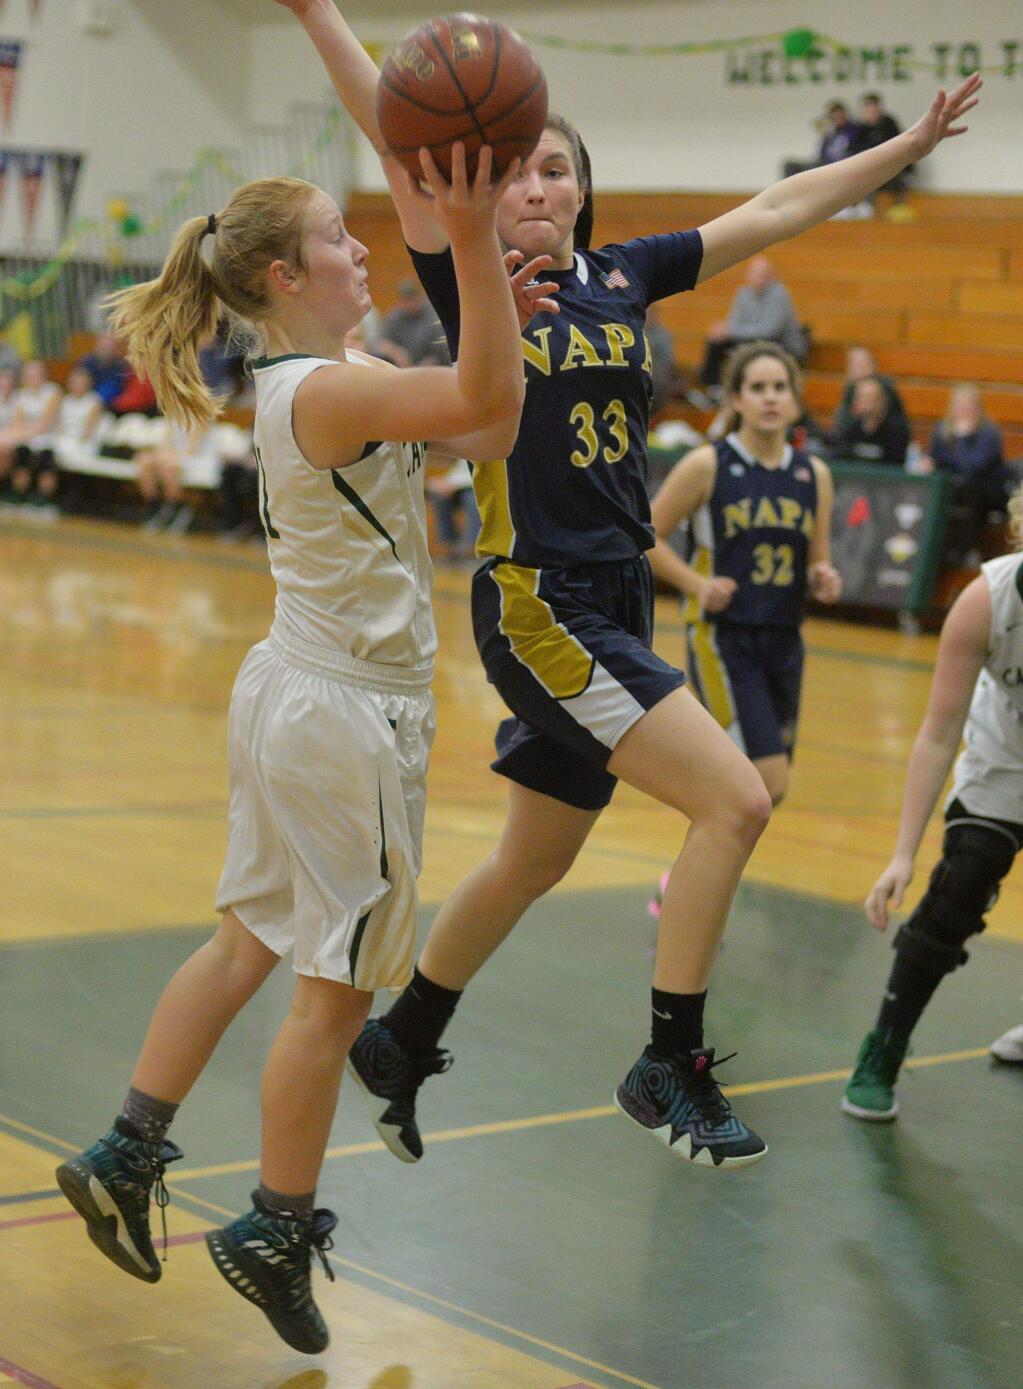 SUMNER FOWLER/FOR THE ARGUS-COURIERCasa Grande's Trinity Merwin shoots over the out-stretched arms of Napa defender Siena Young.